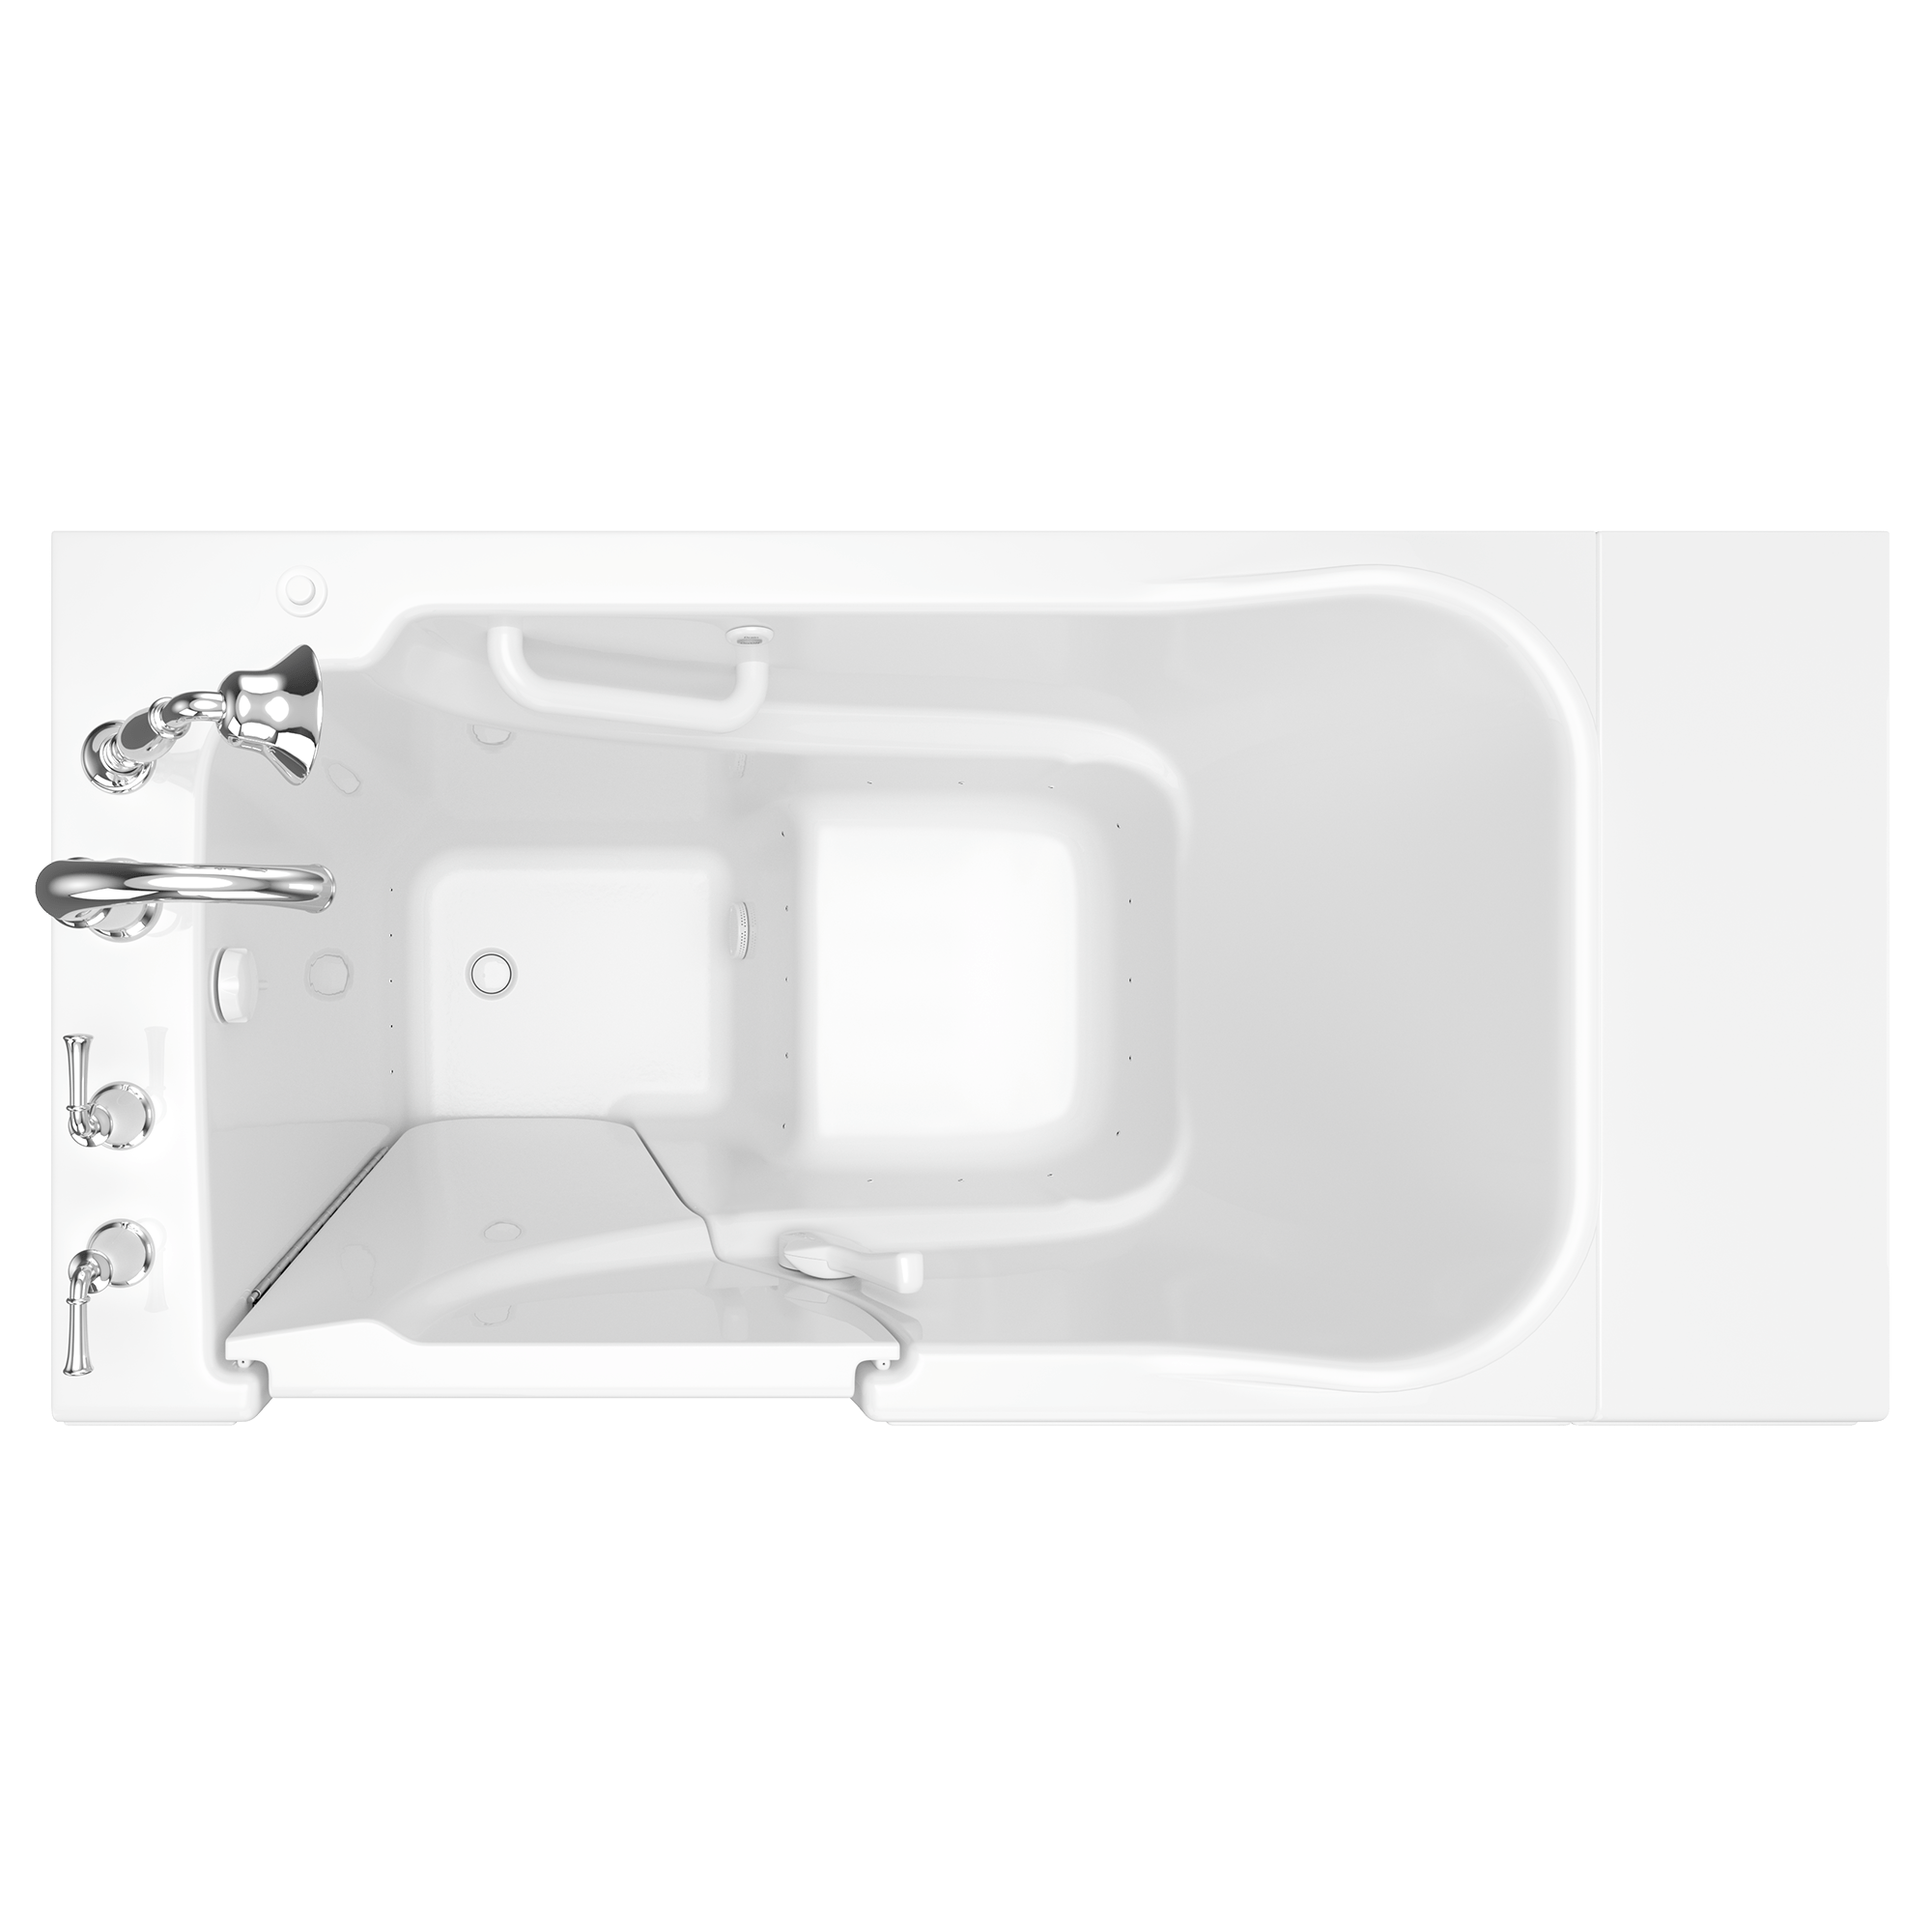 Gelcoat Value Series 30x52 Inch Walk In Bathtub with Air Spa System   Left Hand Door and Drain WIB WHITE